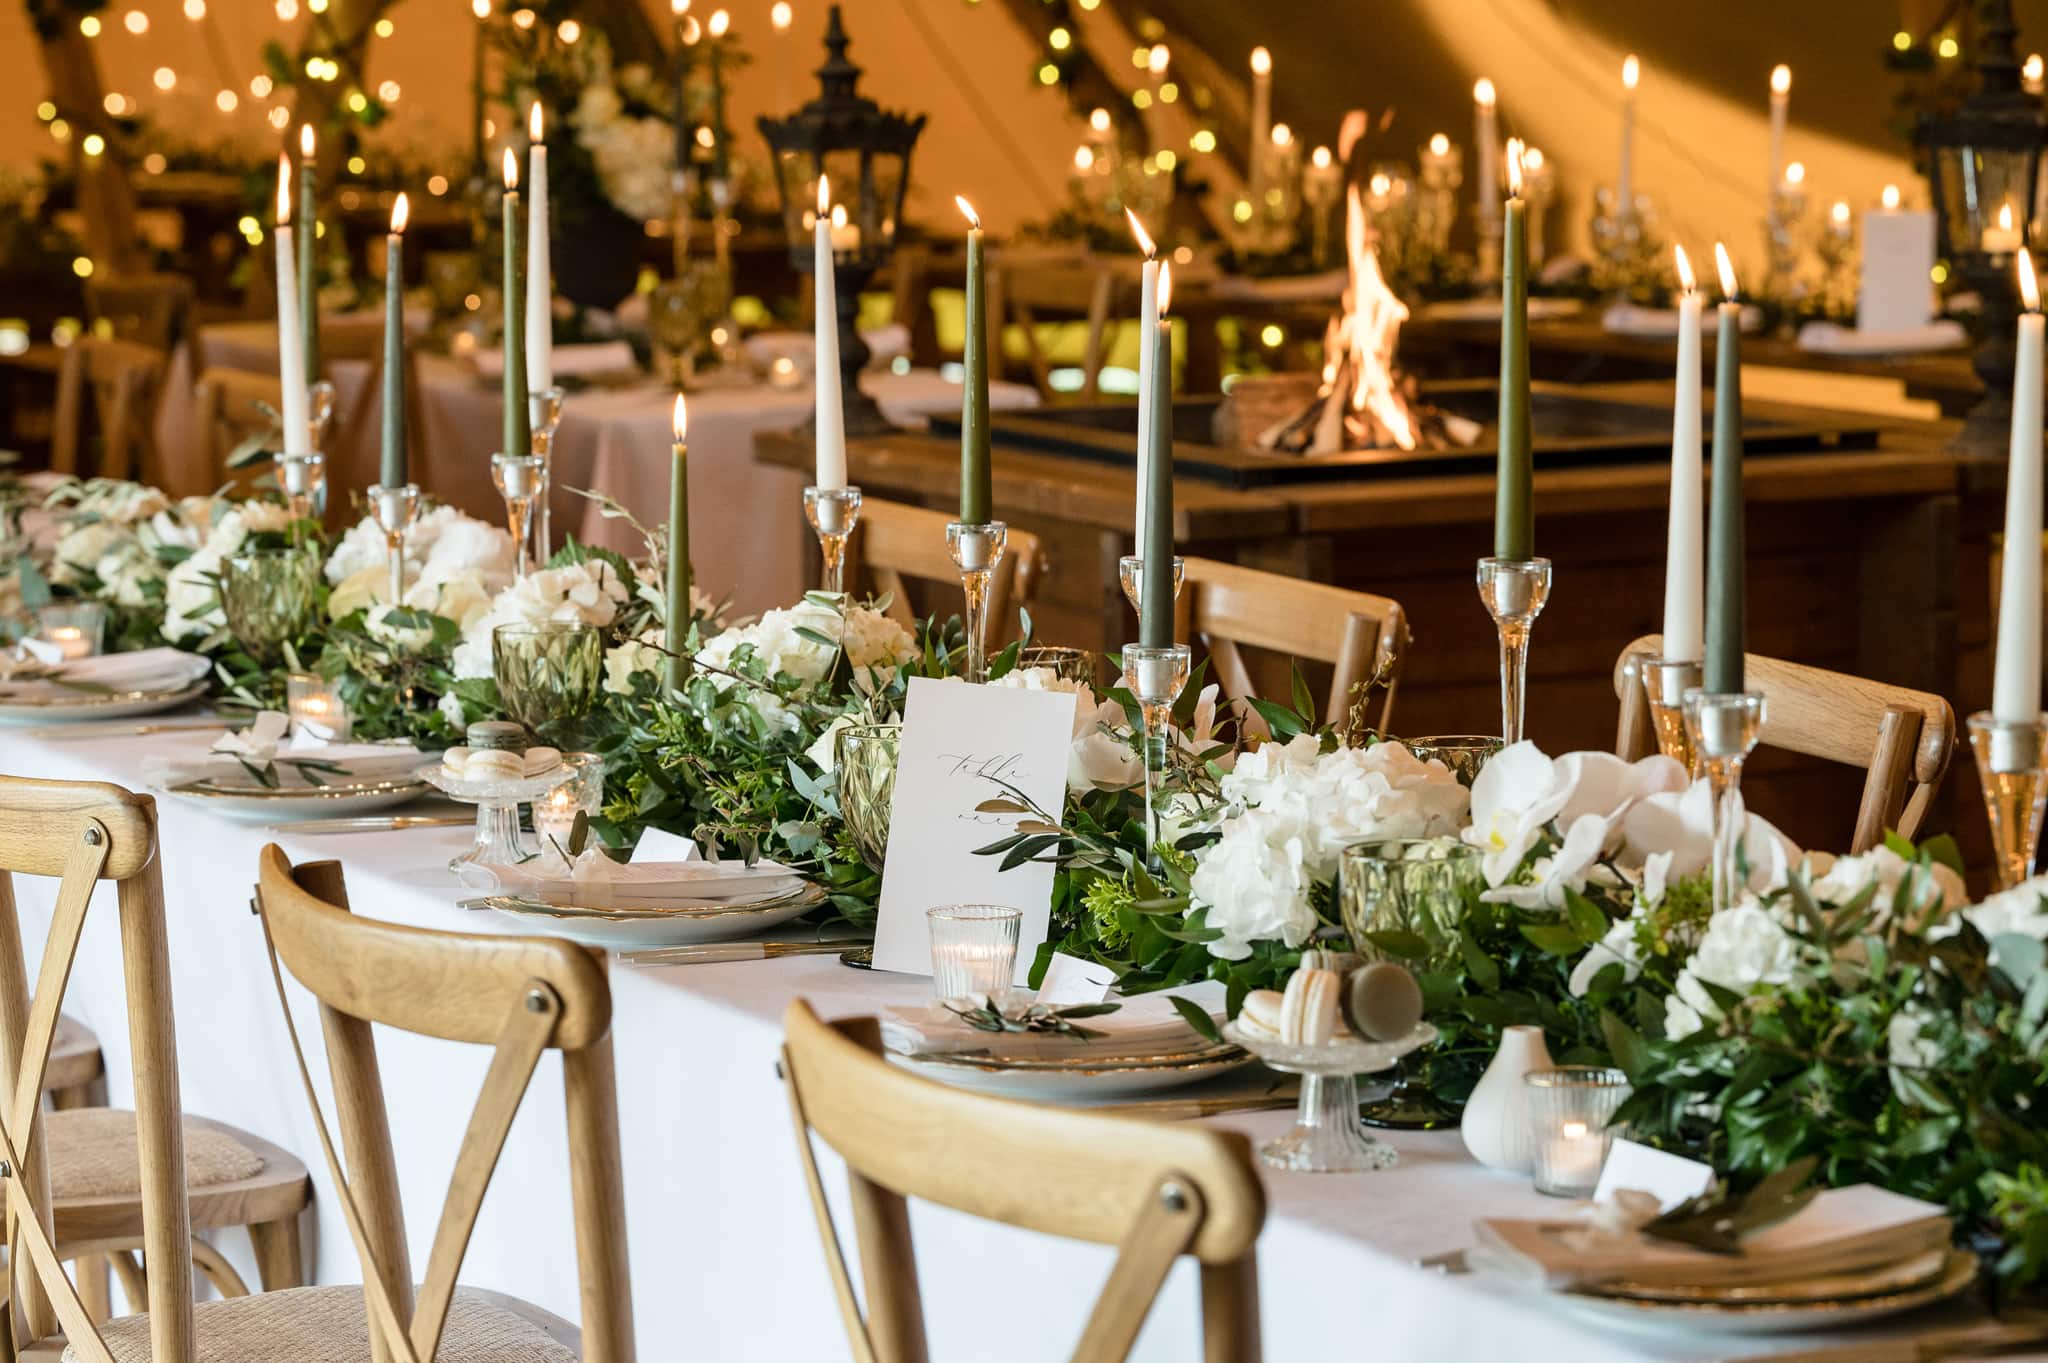 Long bench style table with oak cross-back chairs and white floral table decorations with candles in glass holders and foliage